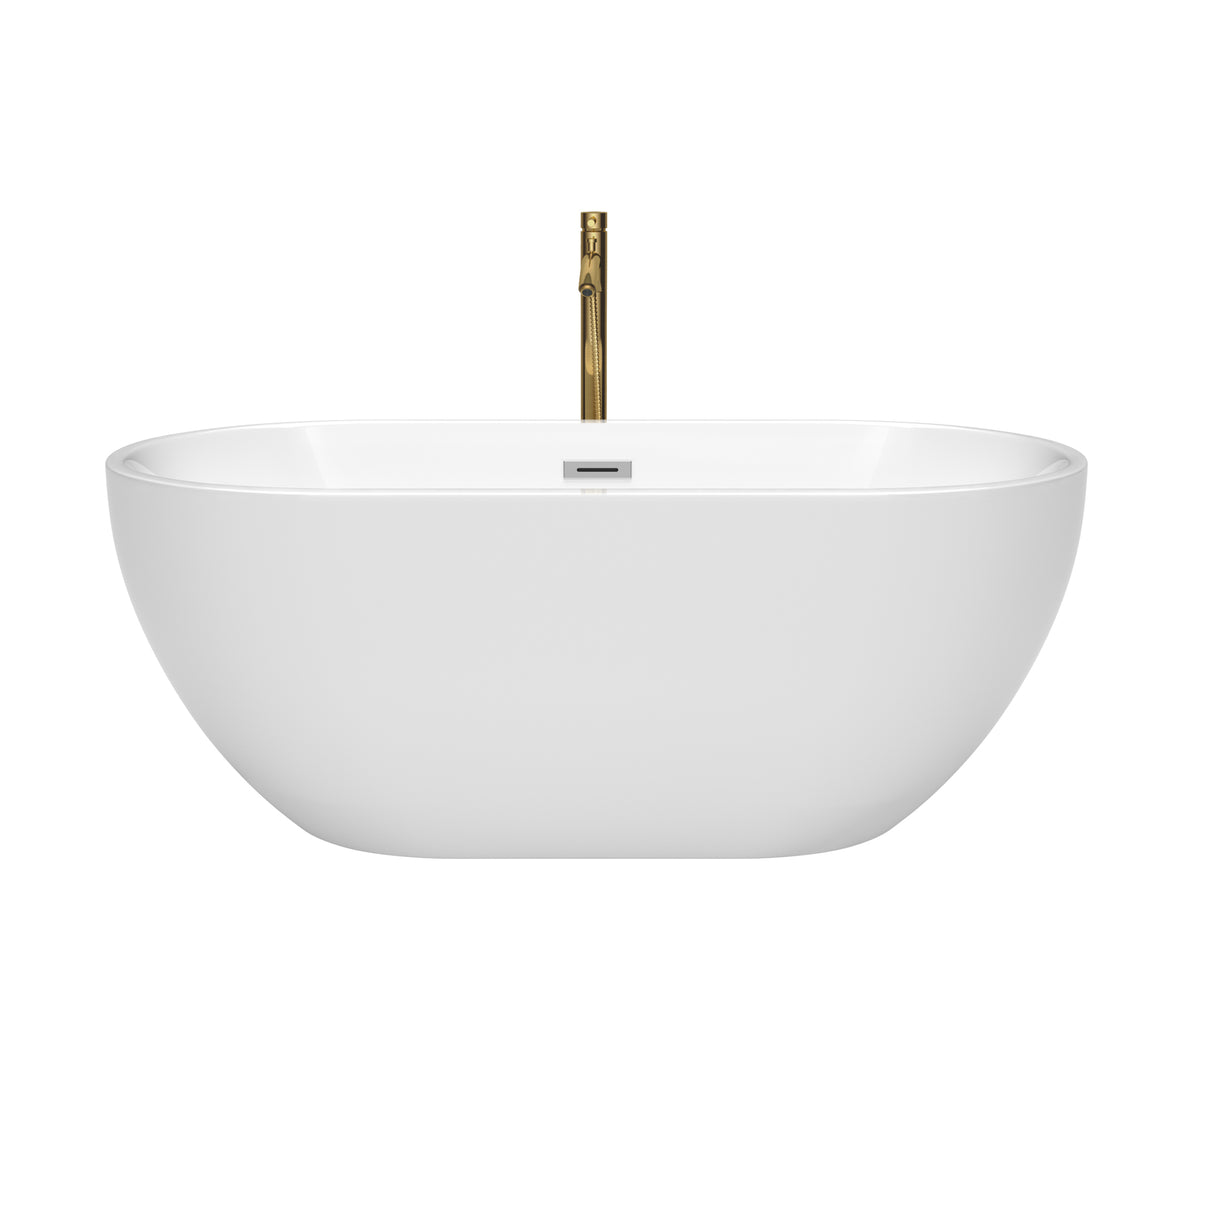 Brooklyn 60 Inch Freestanding Bathtub in White with Polished Chrome Trim and Floor Mounted Faucet in Brushed Gold